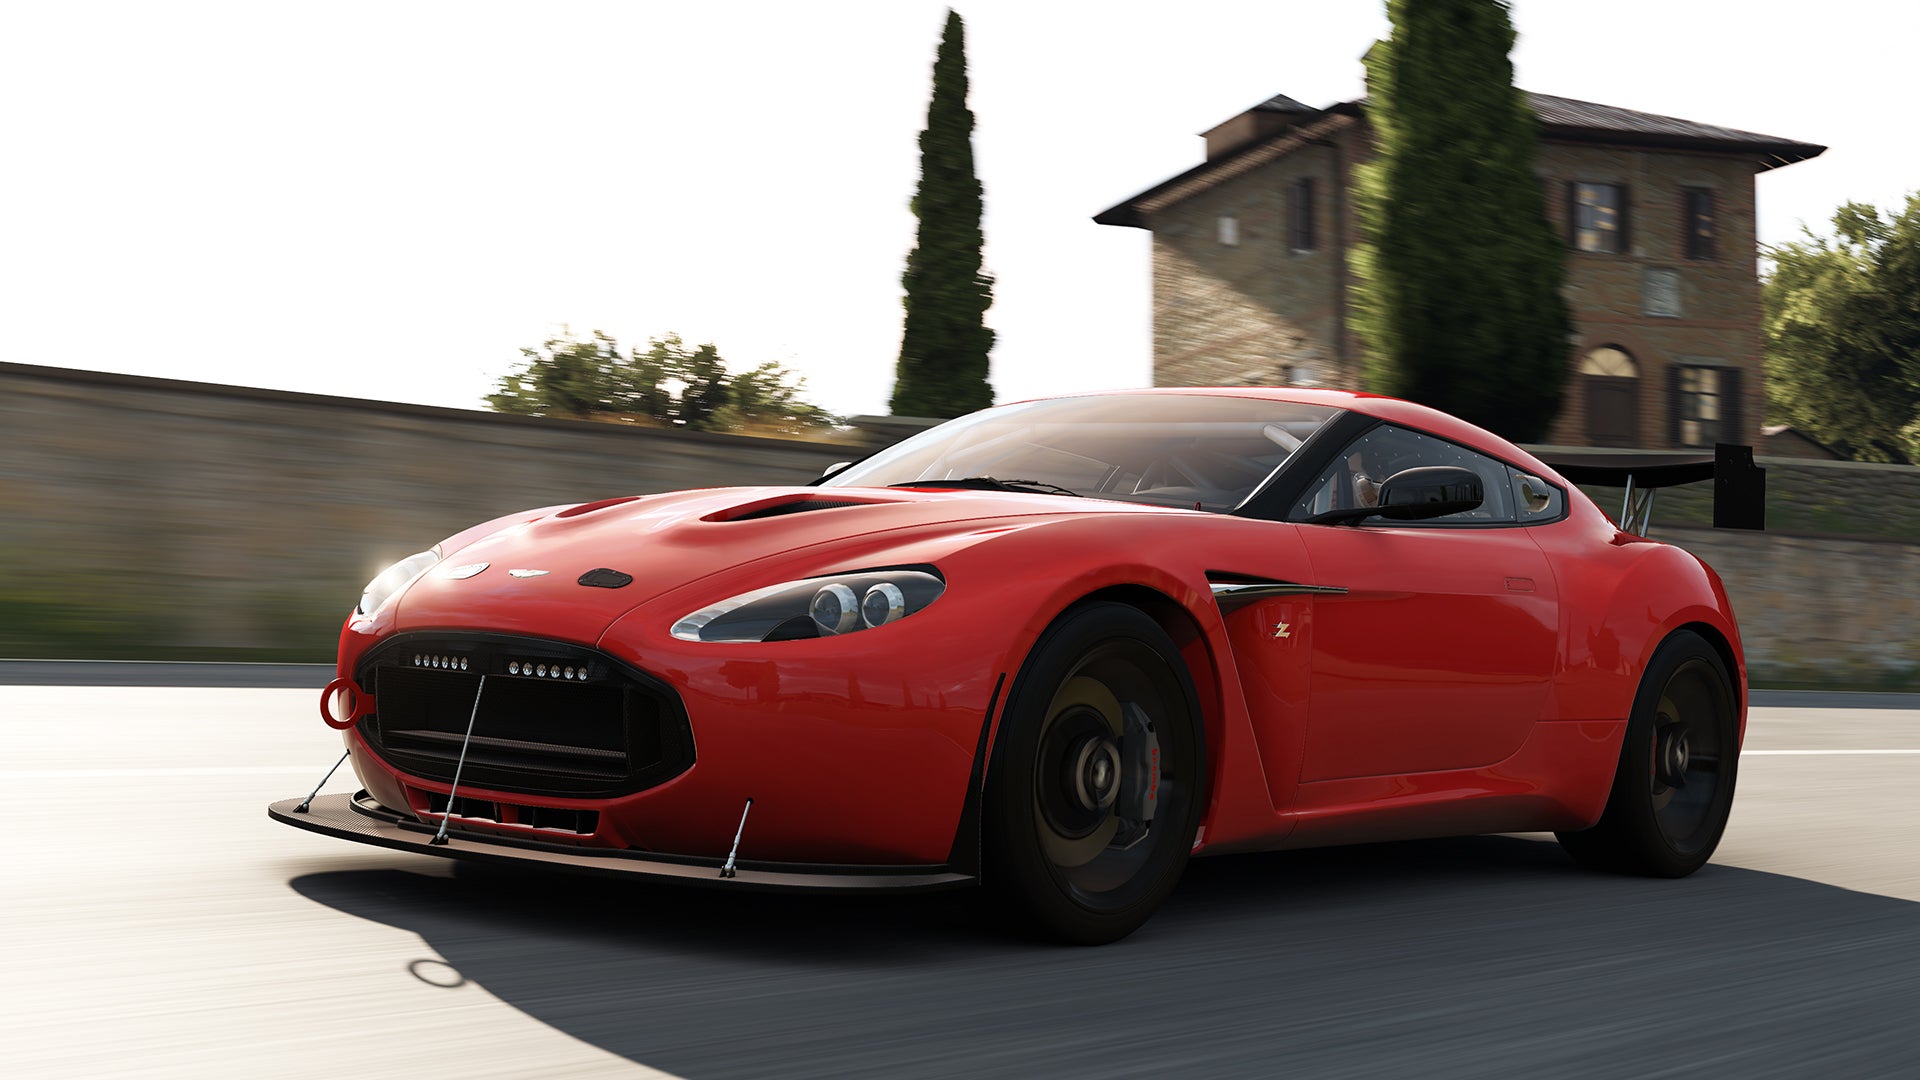 Image for Some of the cars in Forza Horizon 2 are downright drool worthy 